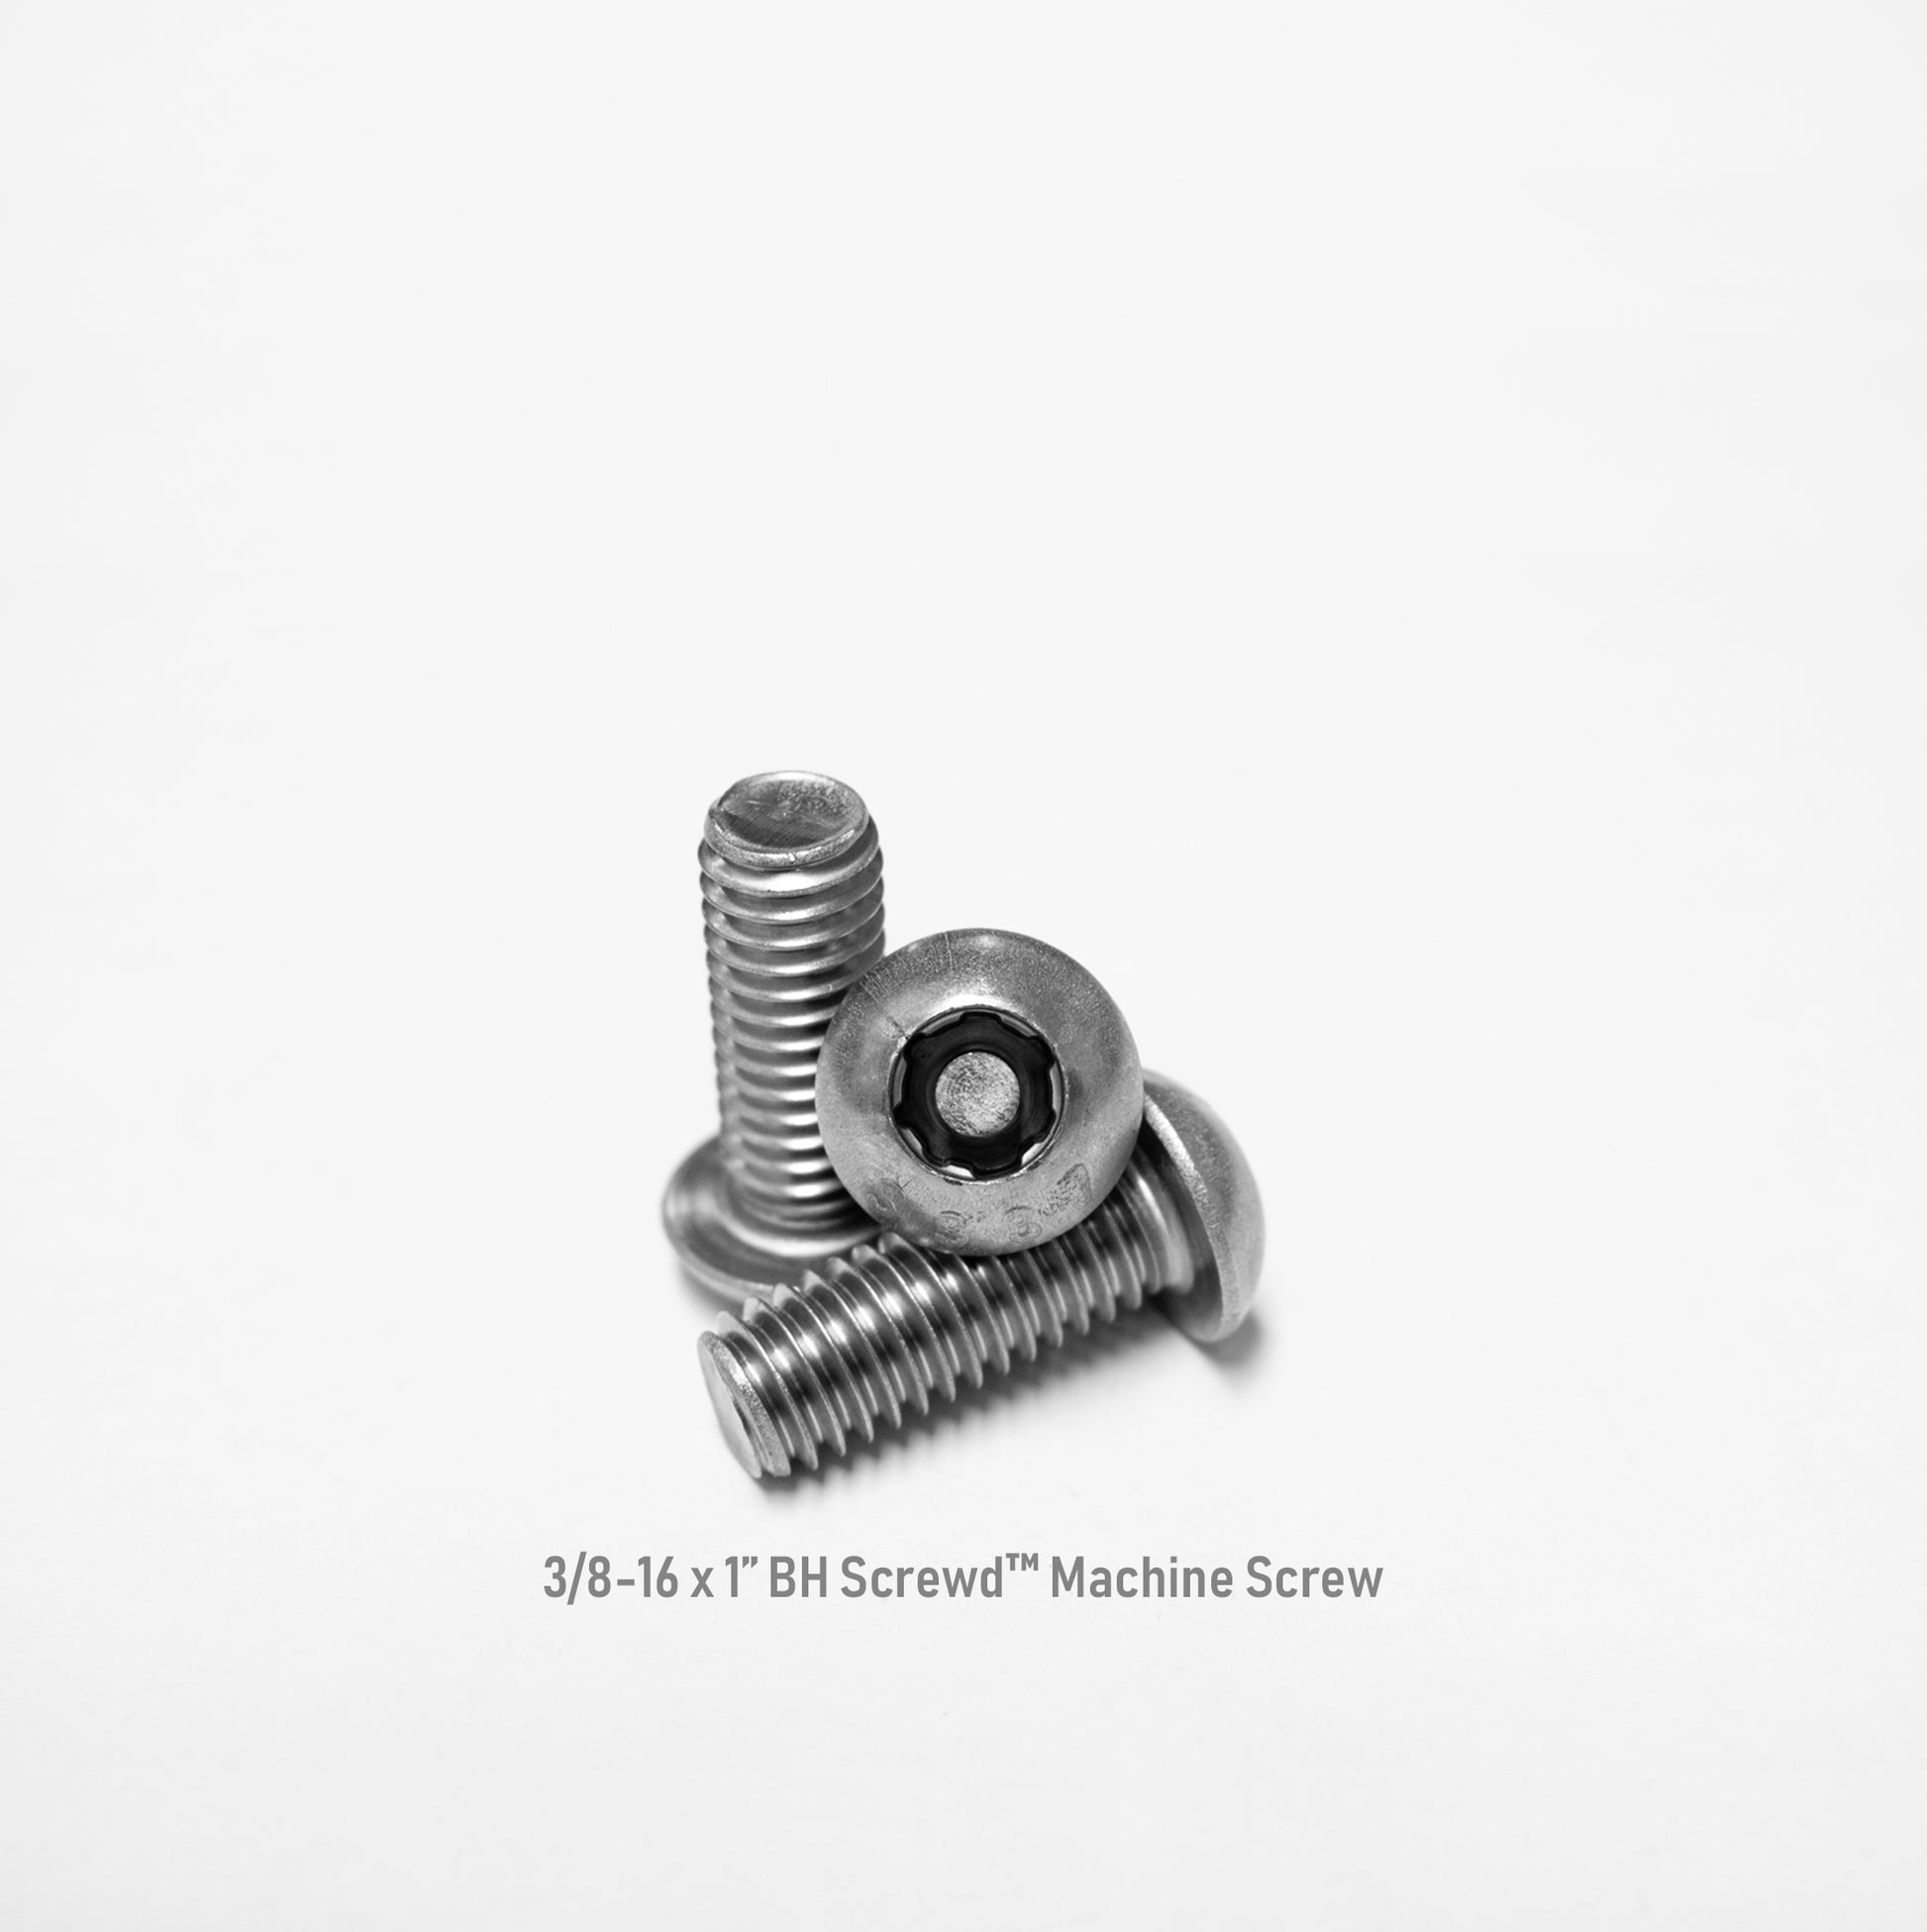 3/8-16 x 1" Button Head Screwd® Security  Machine Screw Made out of Stainless Steel